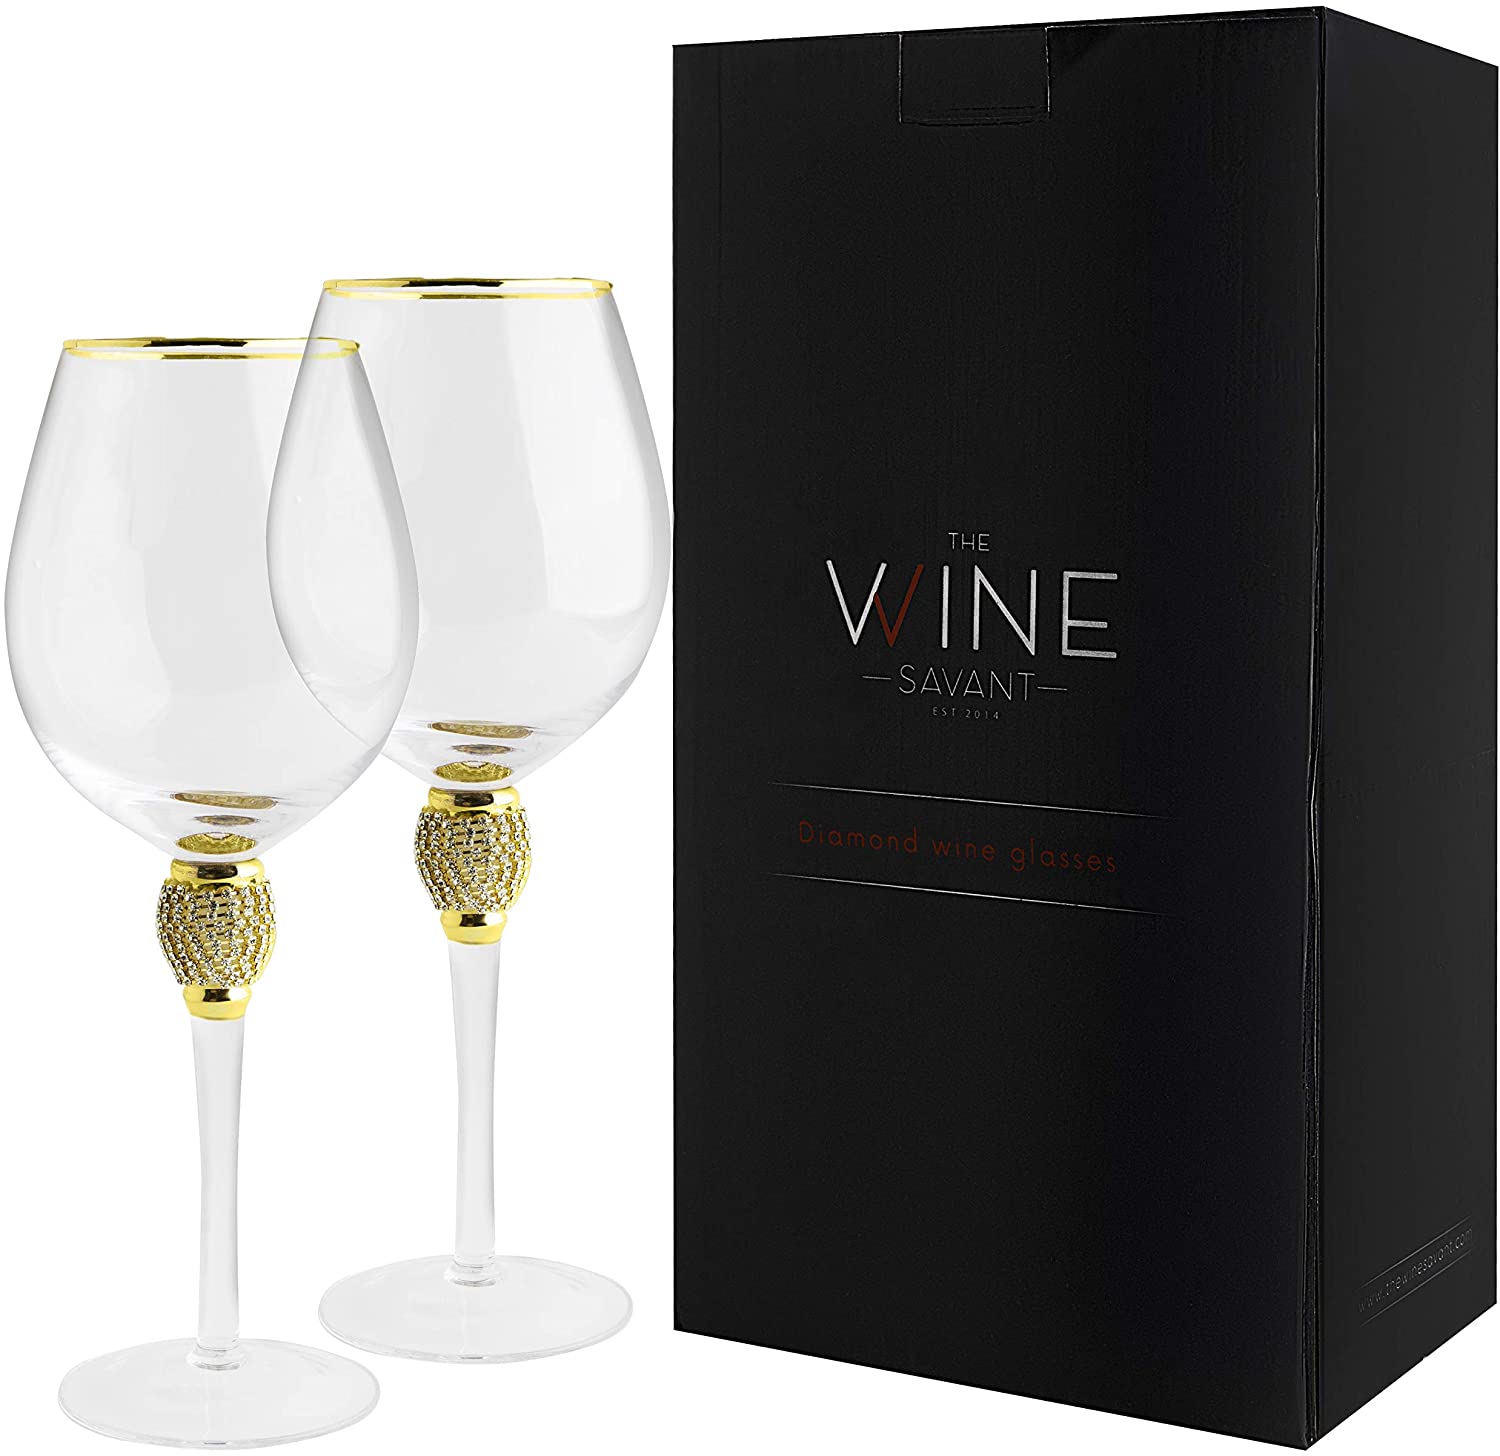 The Wine Savant Large Diamond Wine Glasses, Gold Rim Rhinestone Diamond Glasses - Wedding Glasses - 15 Ounce, Premium Designed Wine Glasses for Spirits and Wine, Gift Boxed (2, Clear)-3